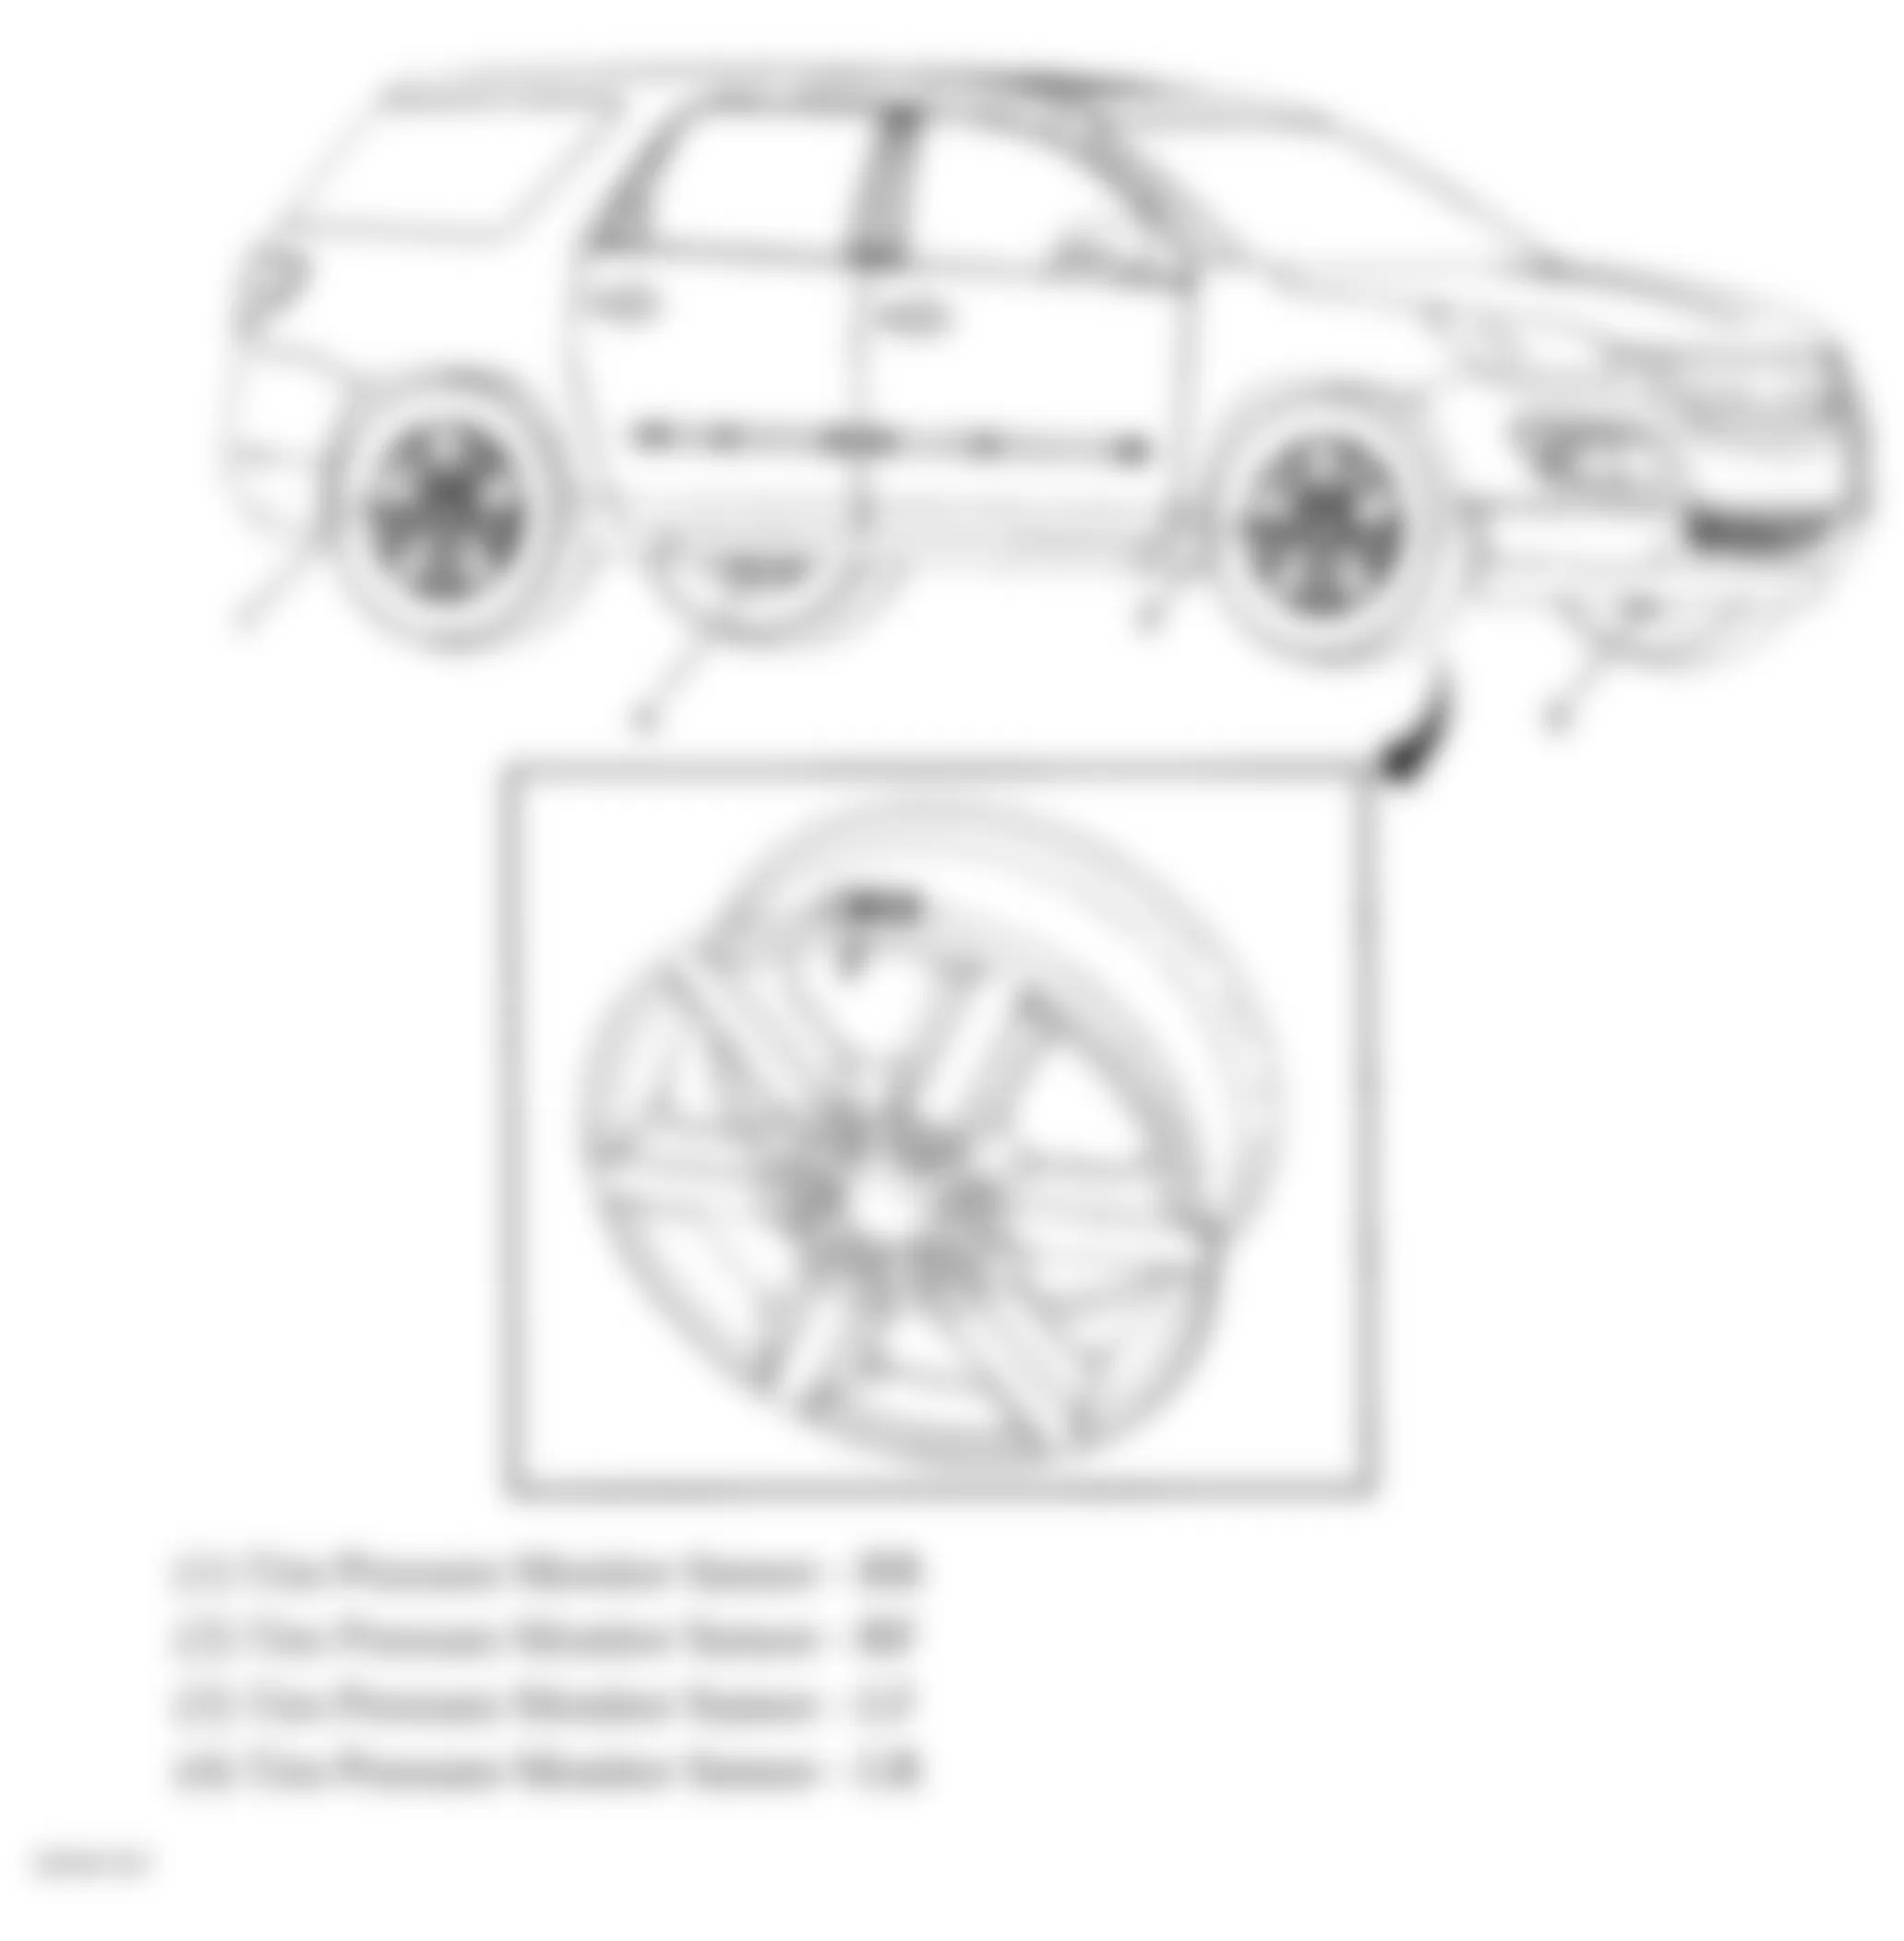 Buick Enclave CXL 2009 - Component Locations -  Vehicle Tire Overview